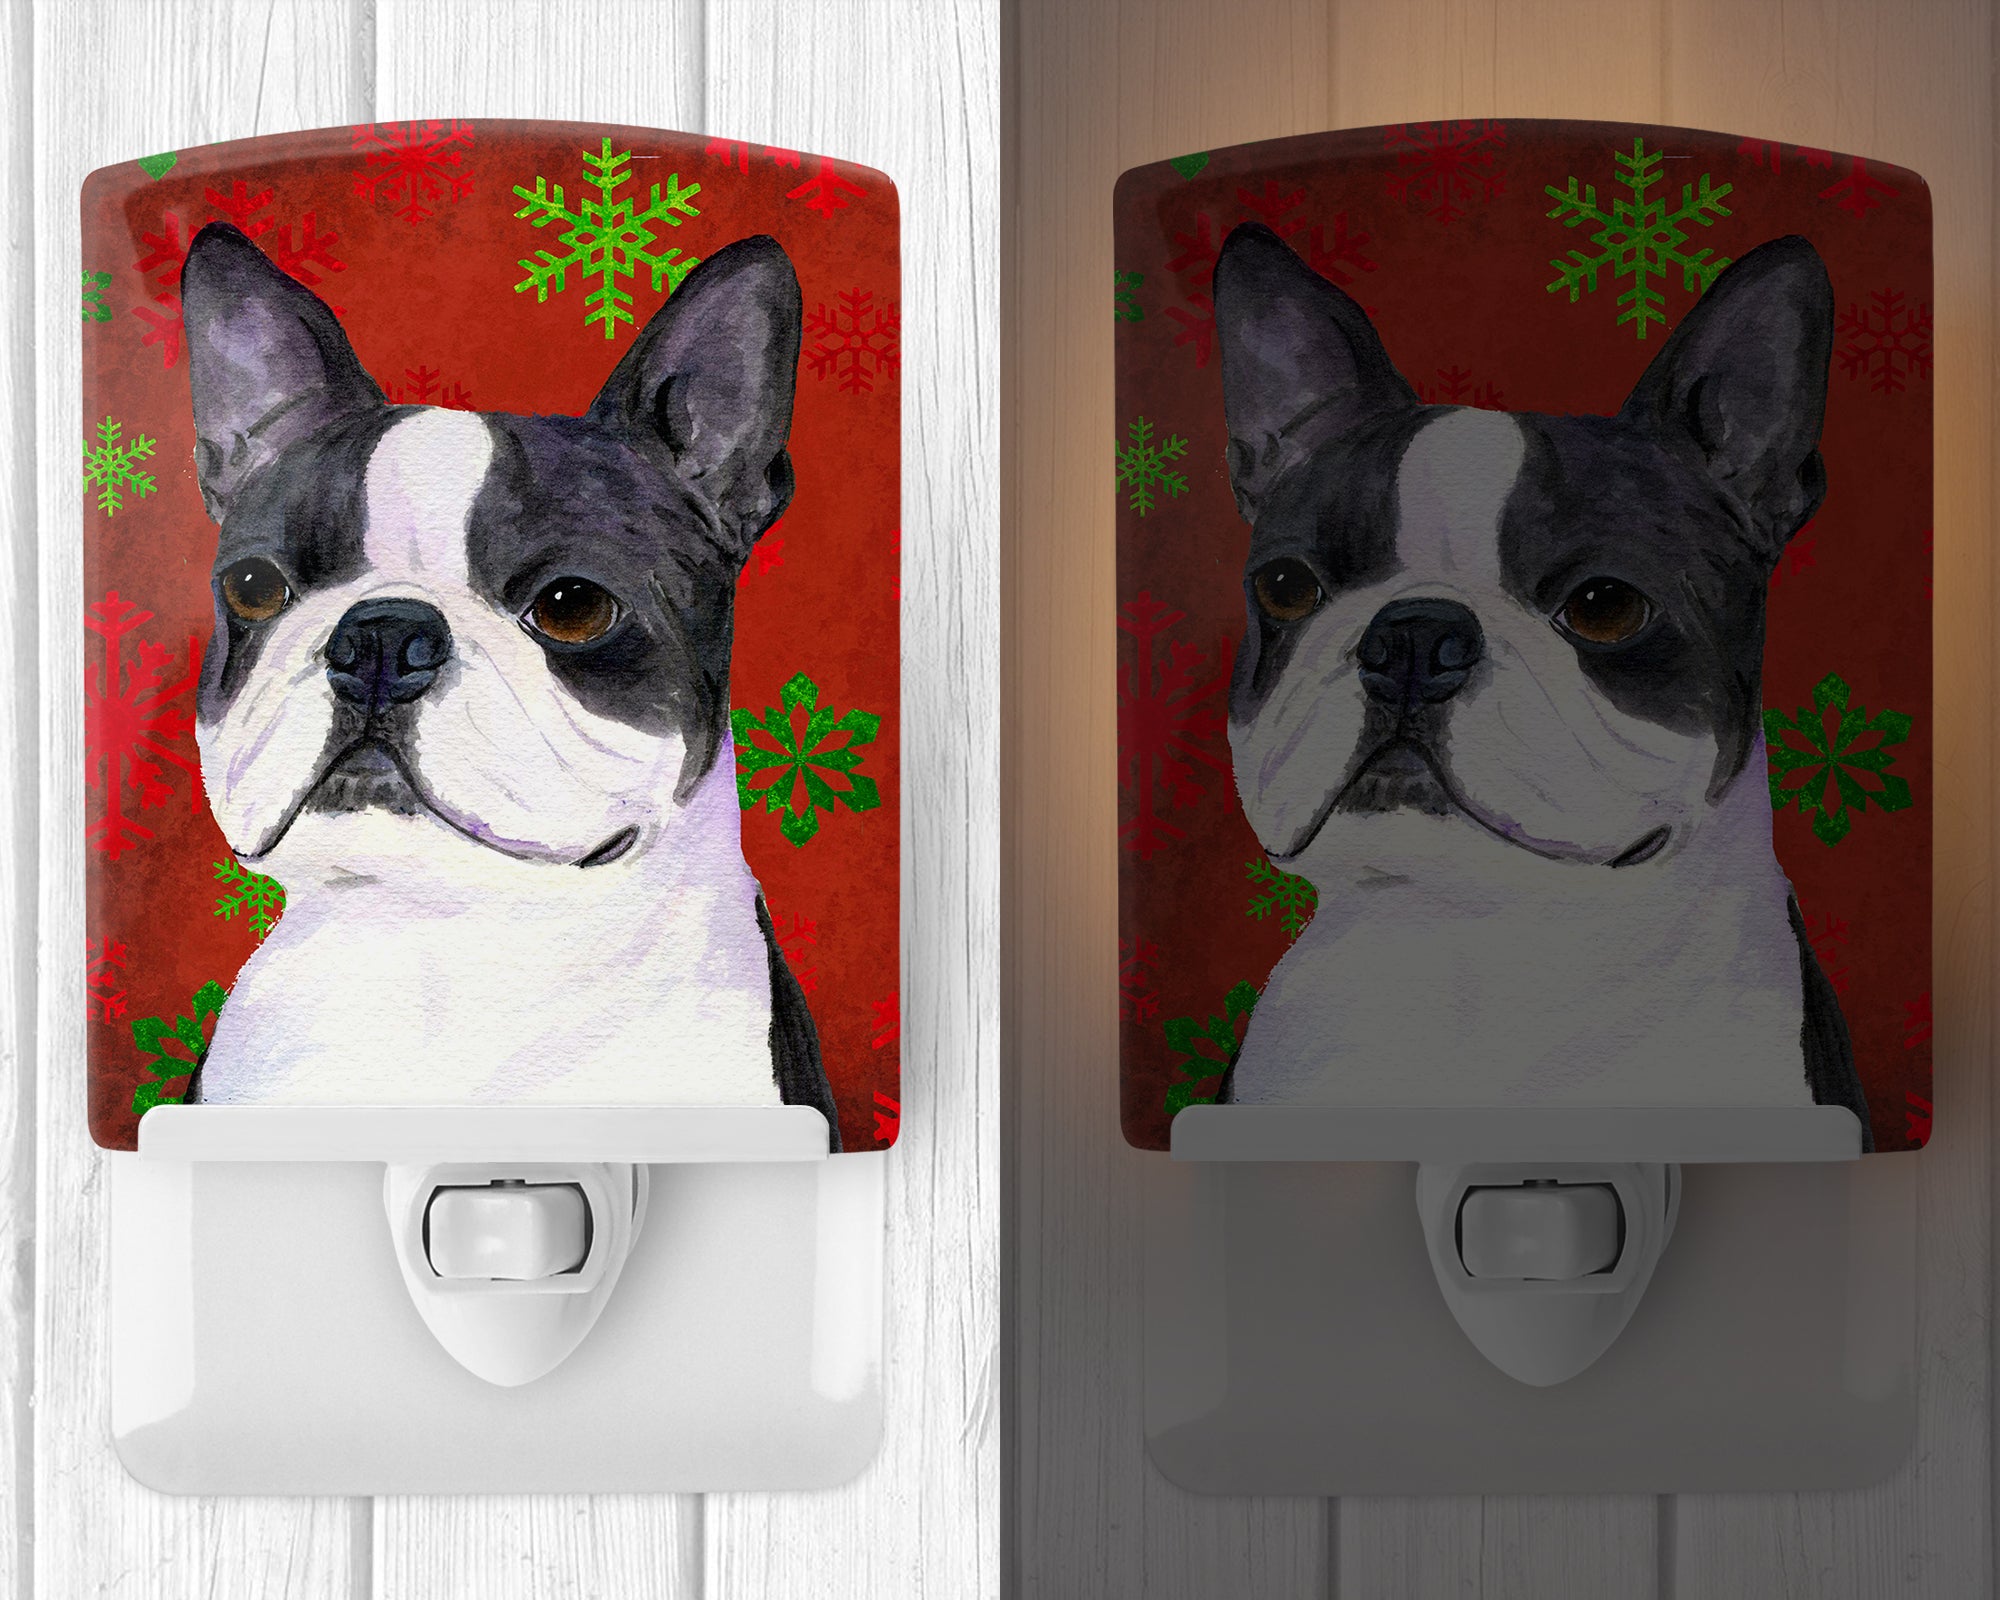 Boston Terrier Red Green Snowflakes Christmas Ceramic Night Light SS4723CNL - the-store.com